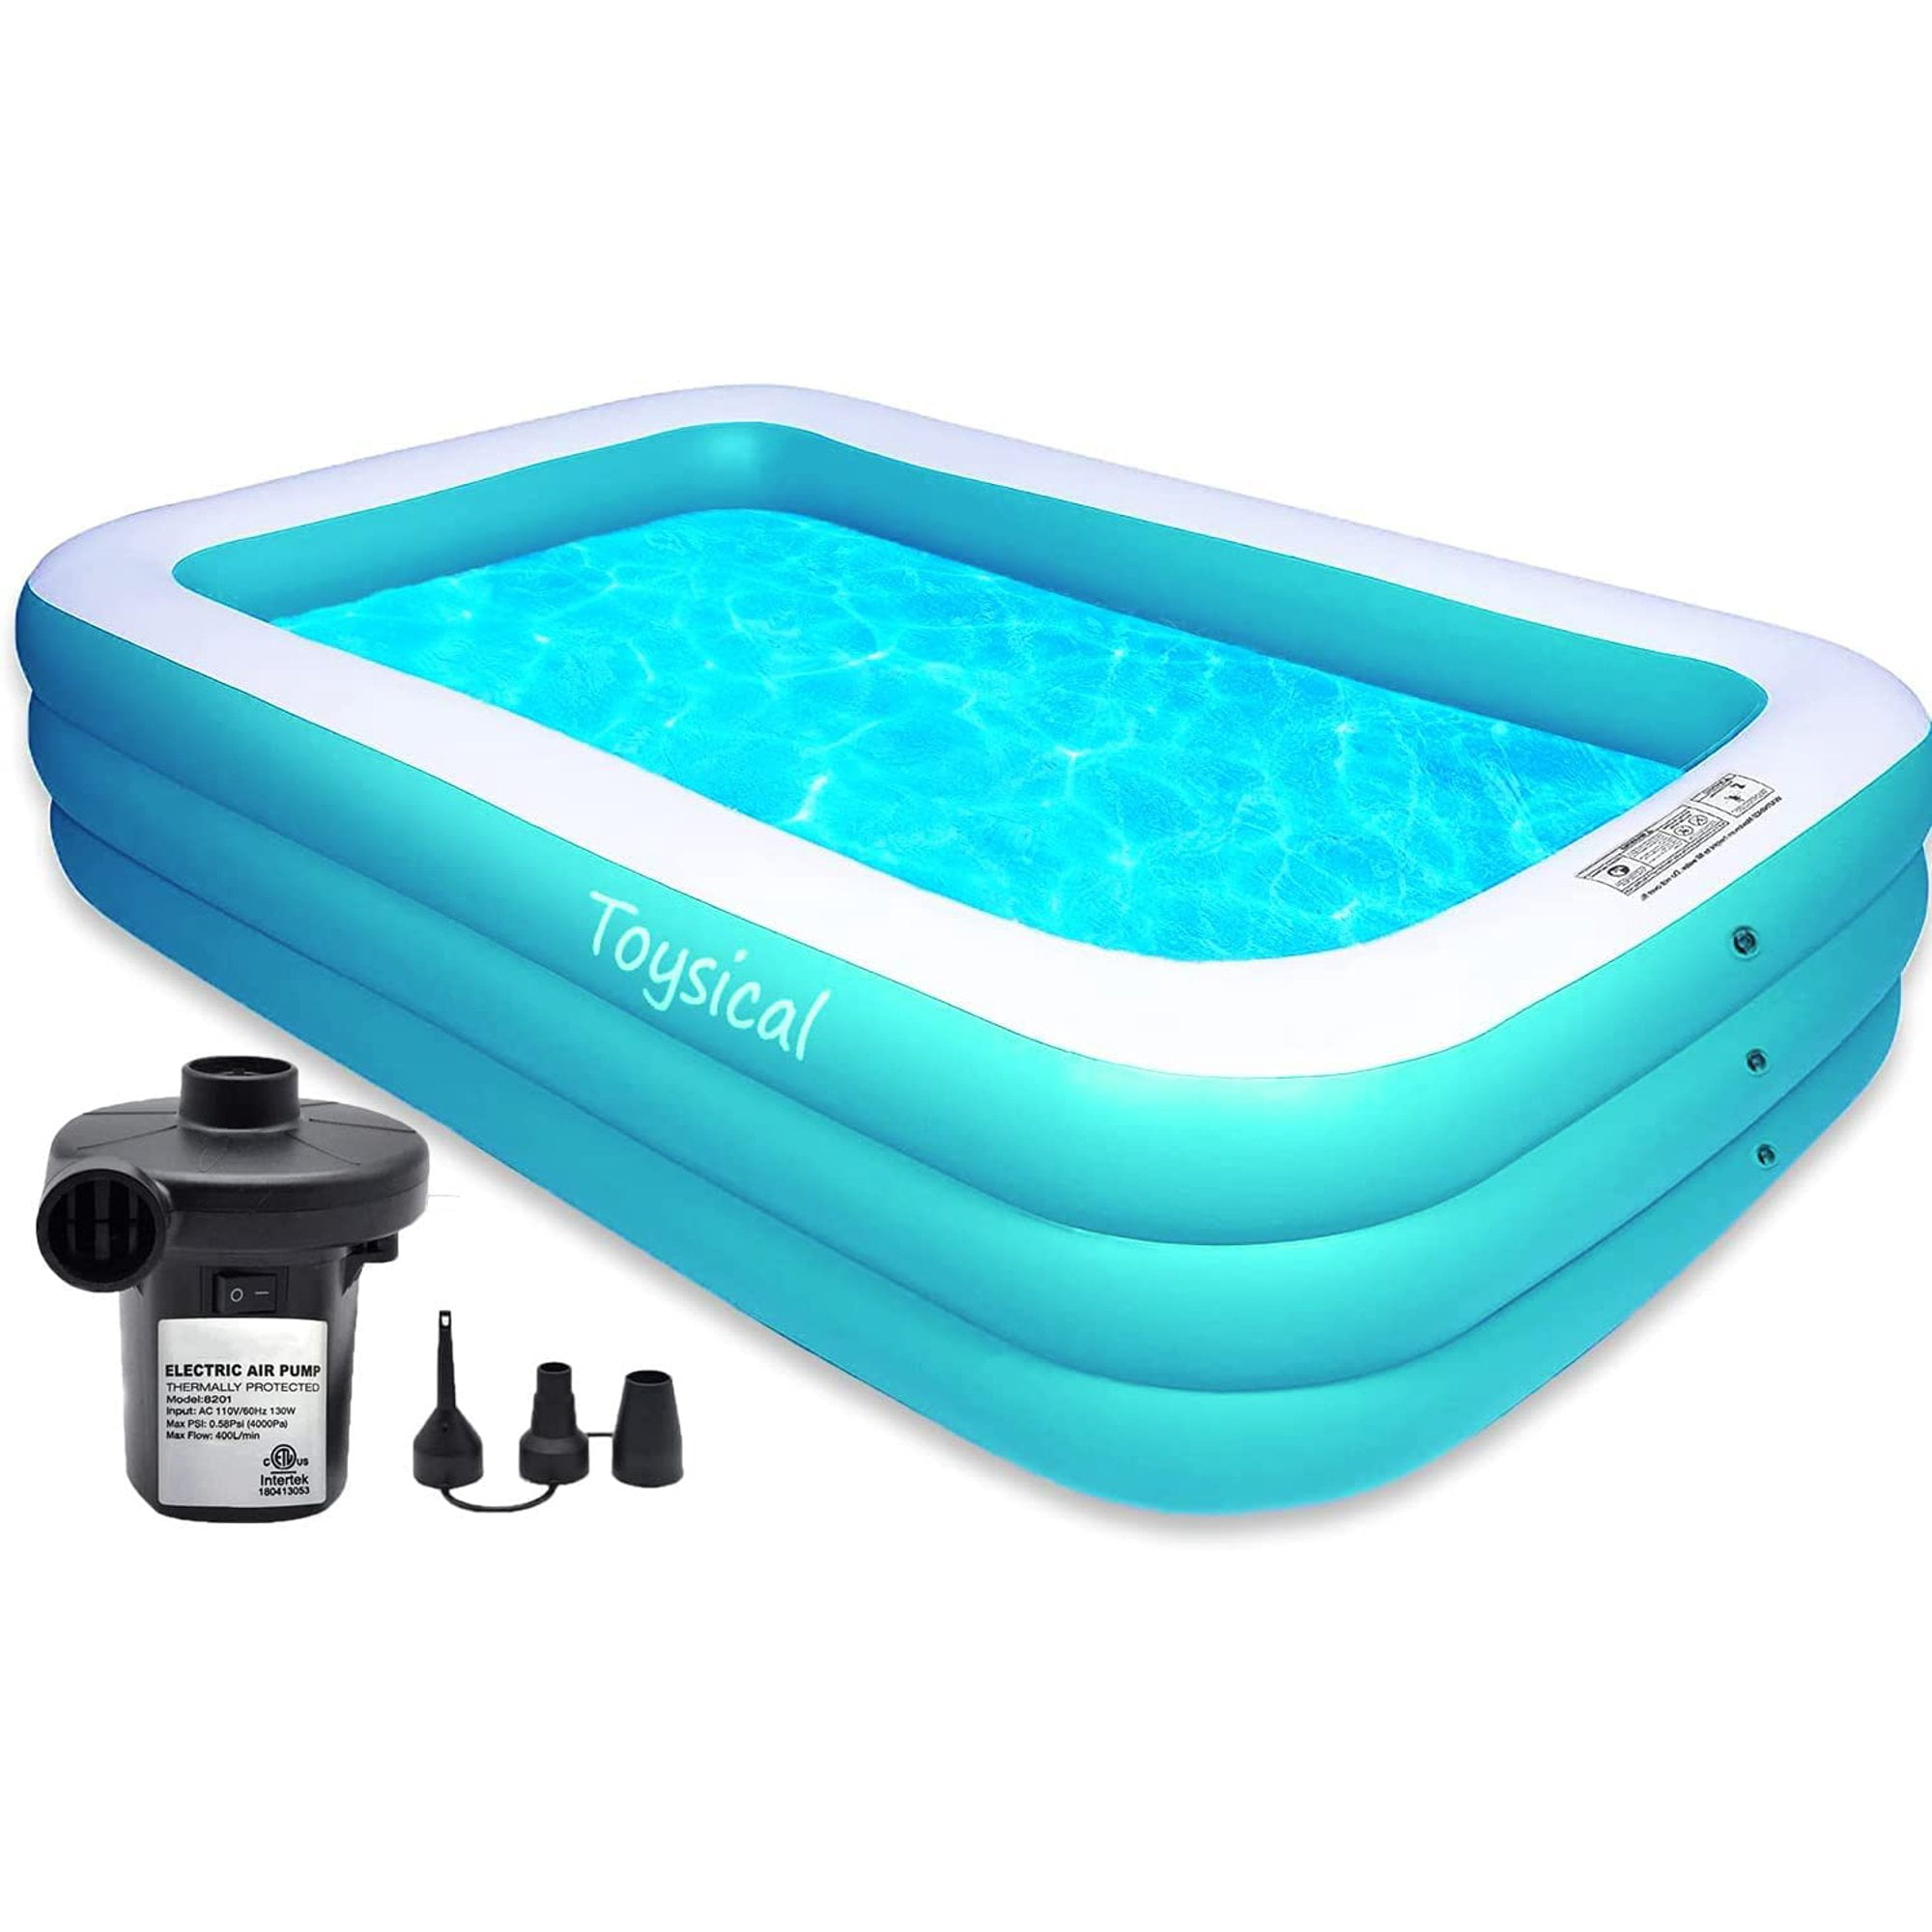 Toysical Inflatable Pool with Air Pump - 118 x 72 x 22” Above Ground Pool,  Swimming Pools for Kids and Adults and The Entire Family - More Durable  Than Other Blow Up